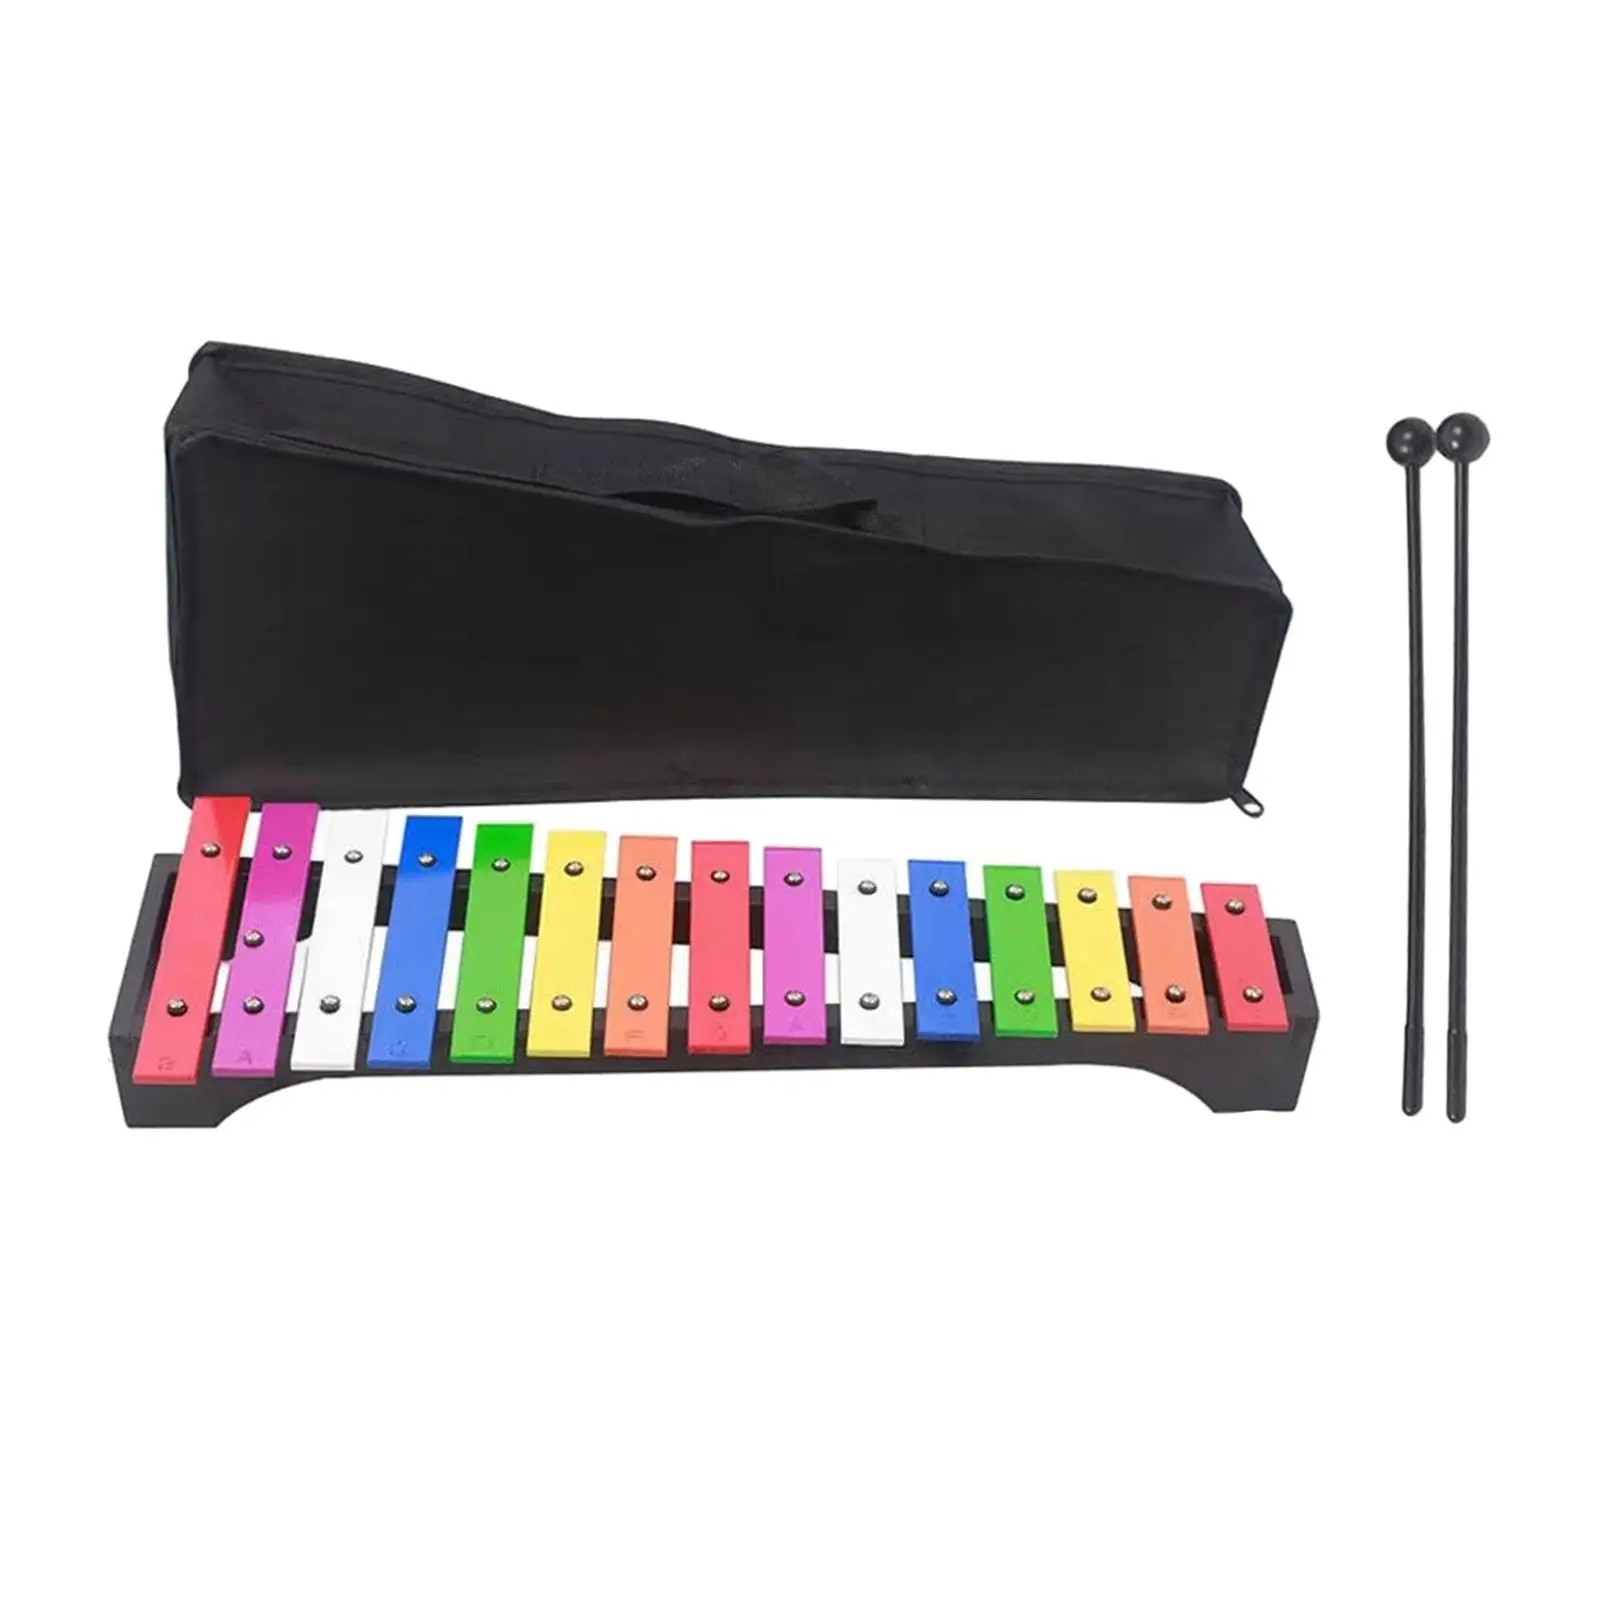 15 Note Glockenspiel Hand Percussion Educational Hand Knock Piano Toy for Live Performance School Orchestras Outside